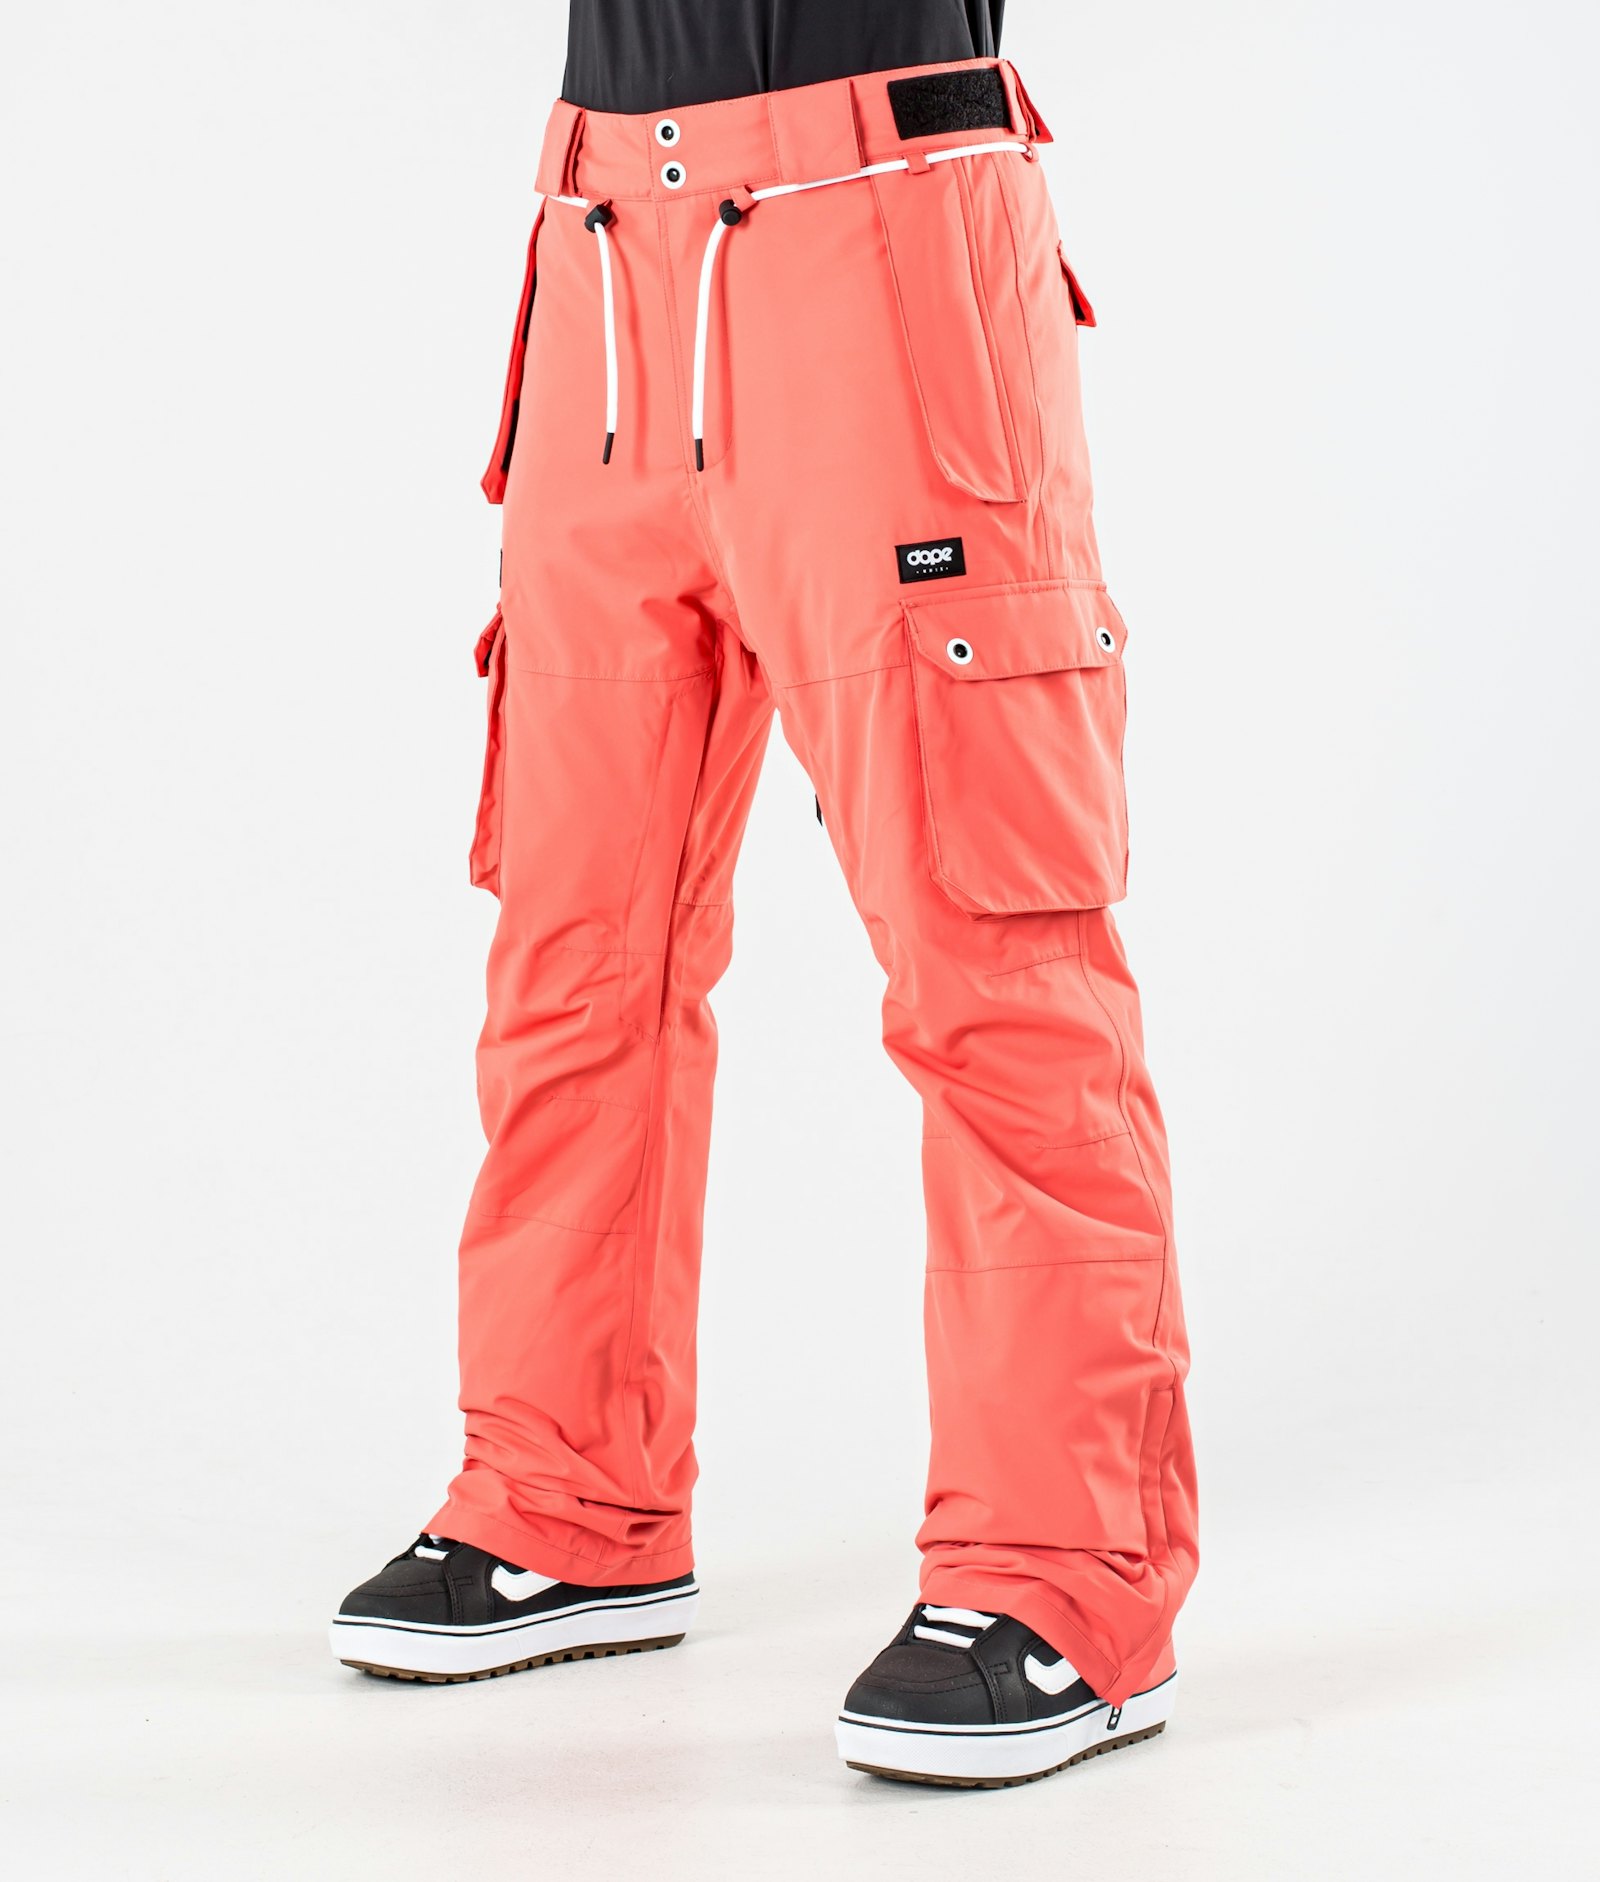 Dope Iconic W 2020 Snowboard Pants Women Coral